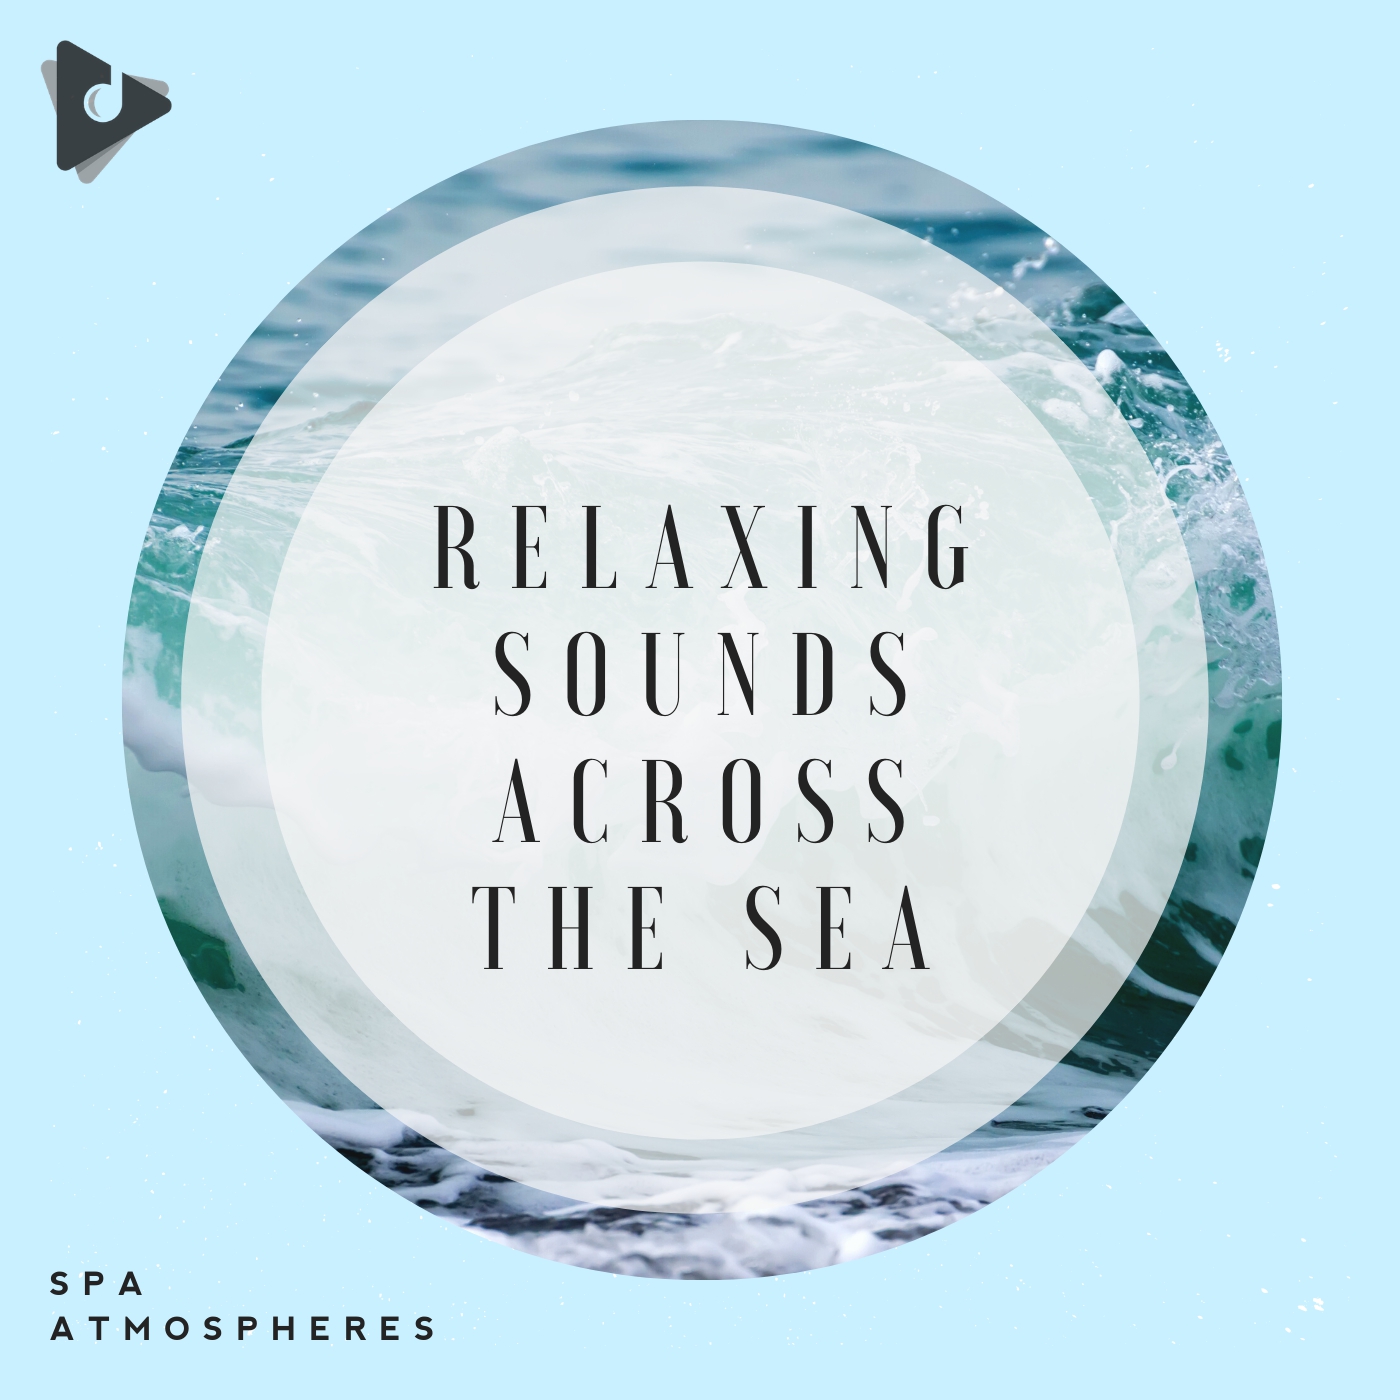 Relaxing Sounds Across The Sea